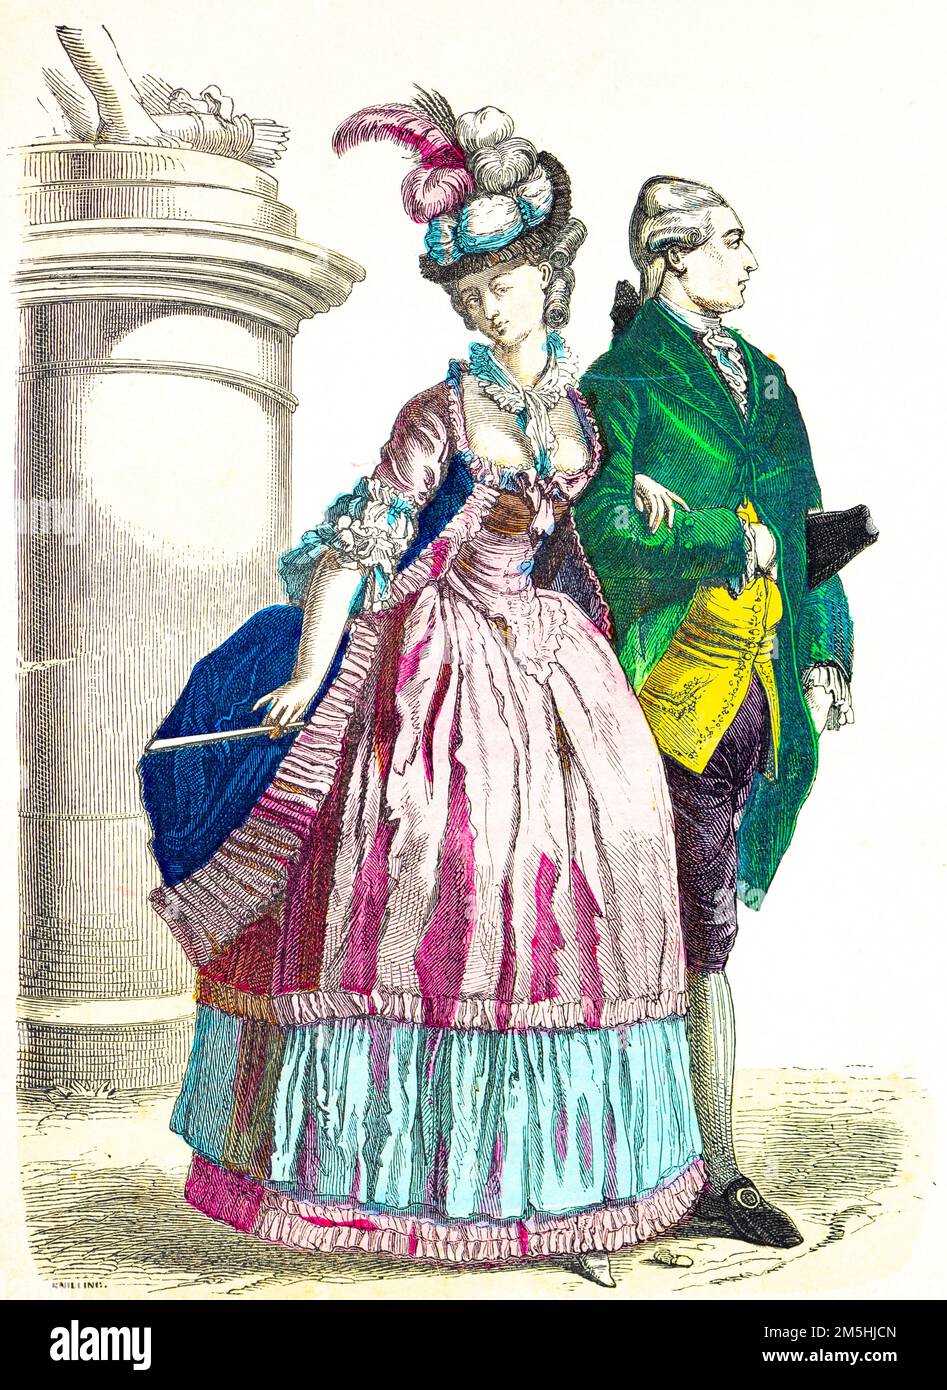 Historical costumes in the middle of 18th century,  historical illustration, Münchener Bilderbogen, München 1890 Stock Photo